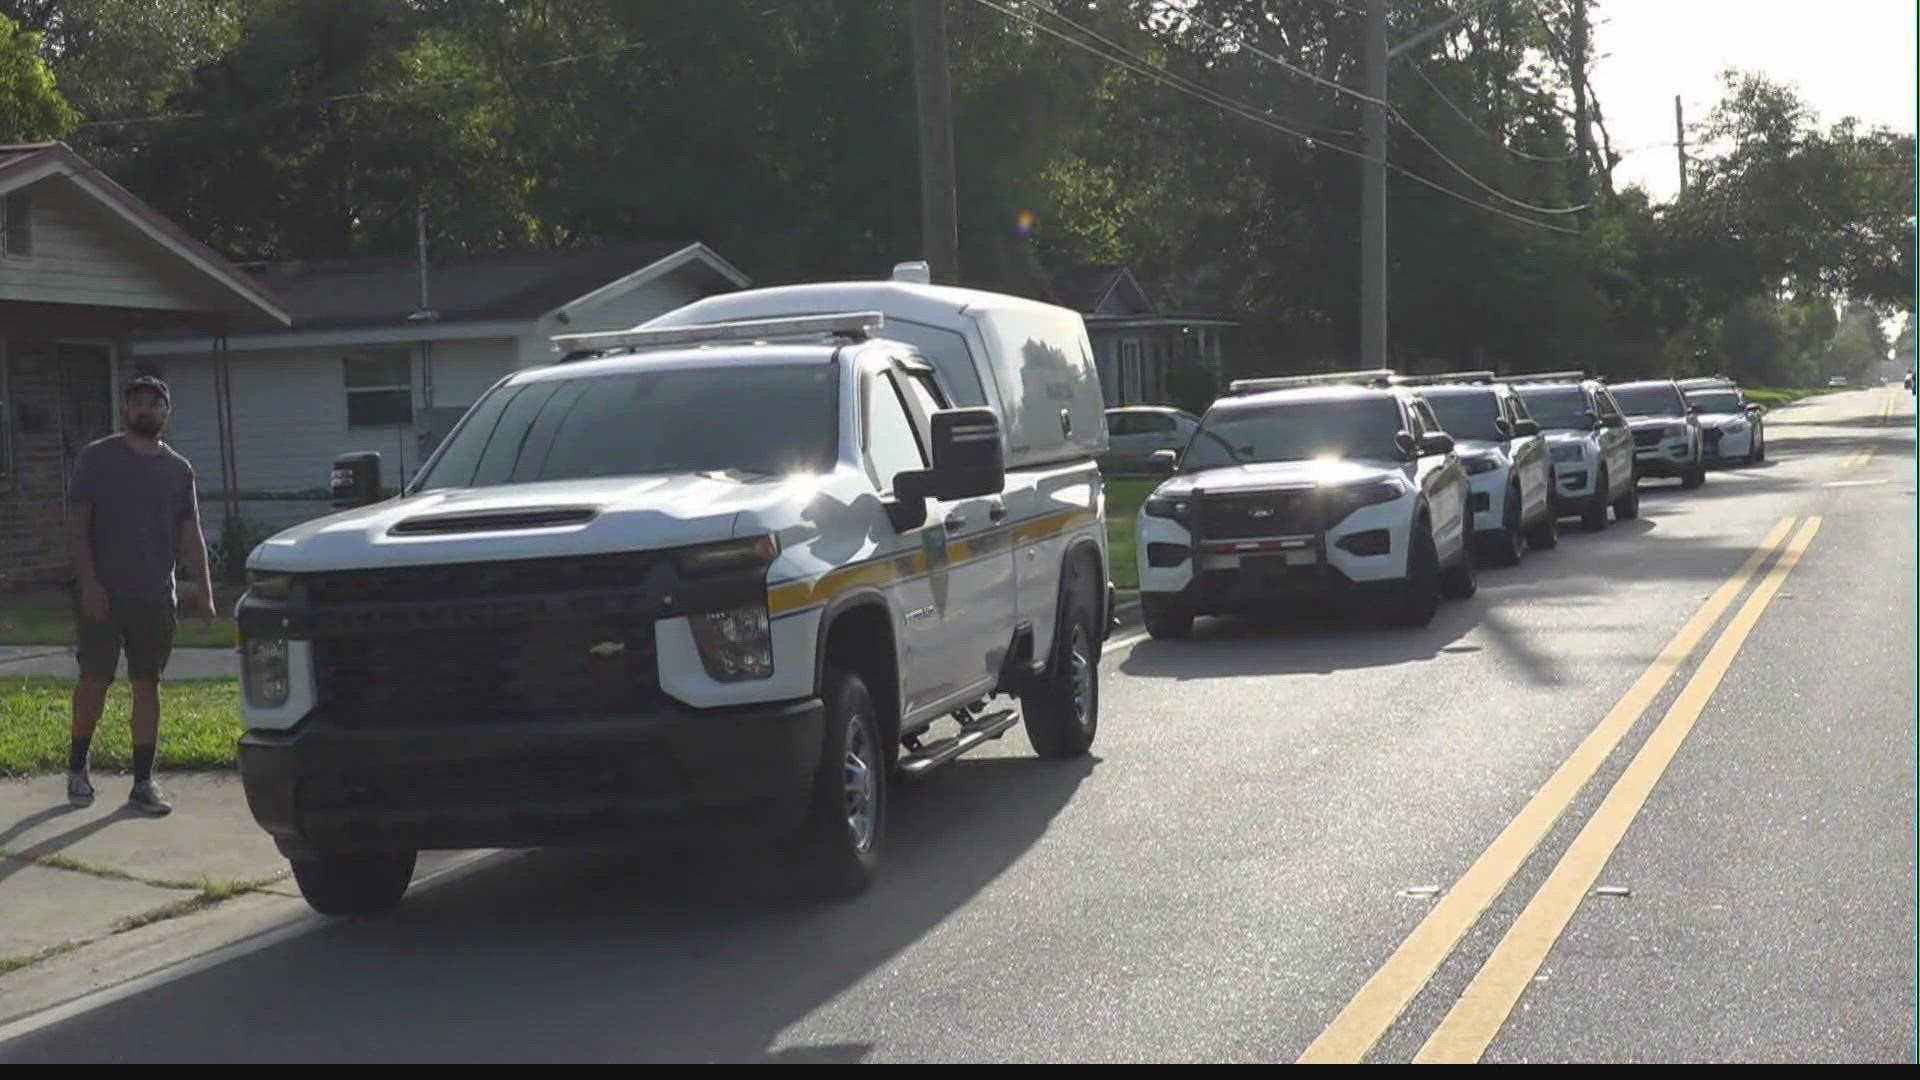 One man was killed in an early morning officer involved shooting in Northwest Jacksonville, officials said.